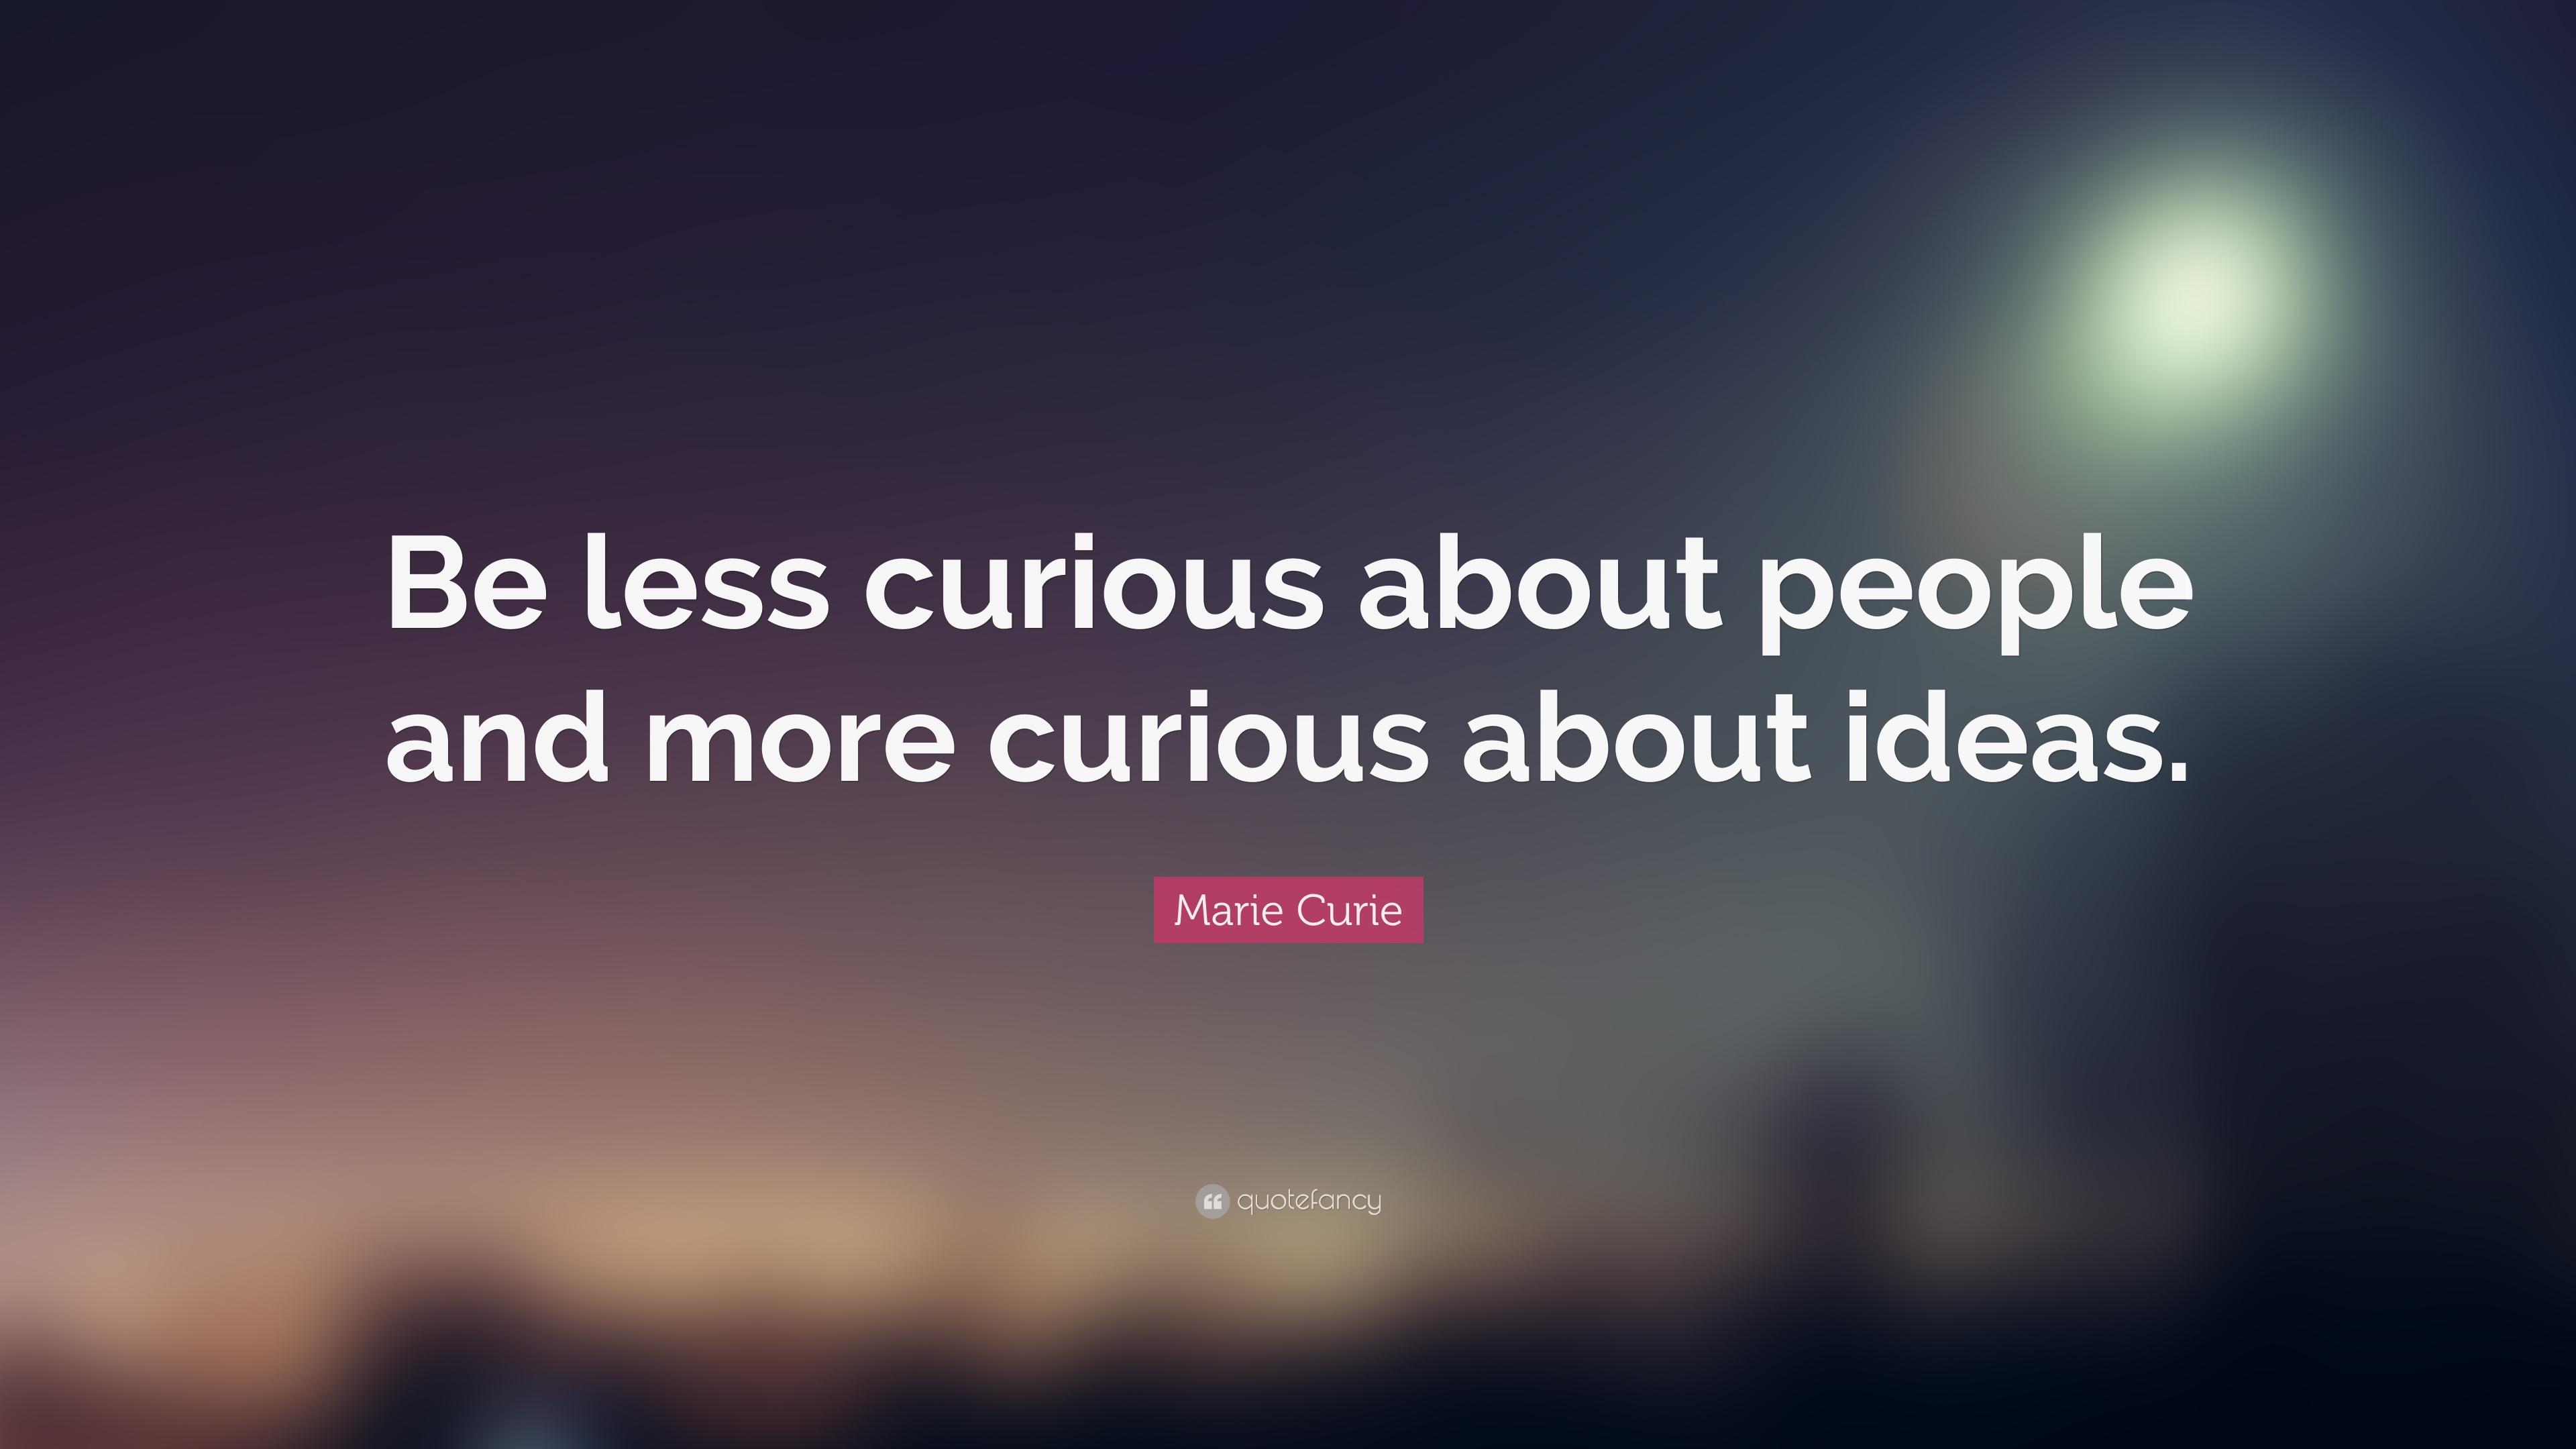 Marie Curie Quote: “Be less curious about people and more